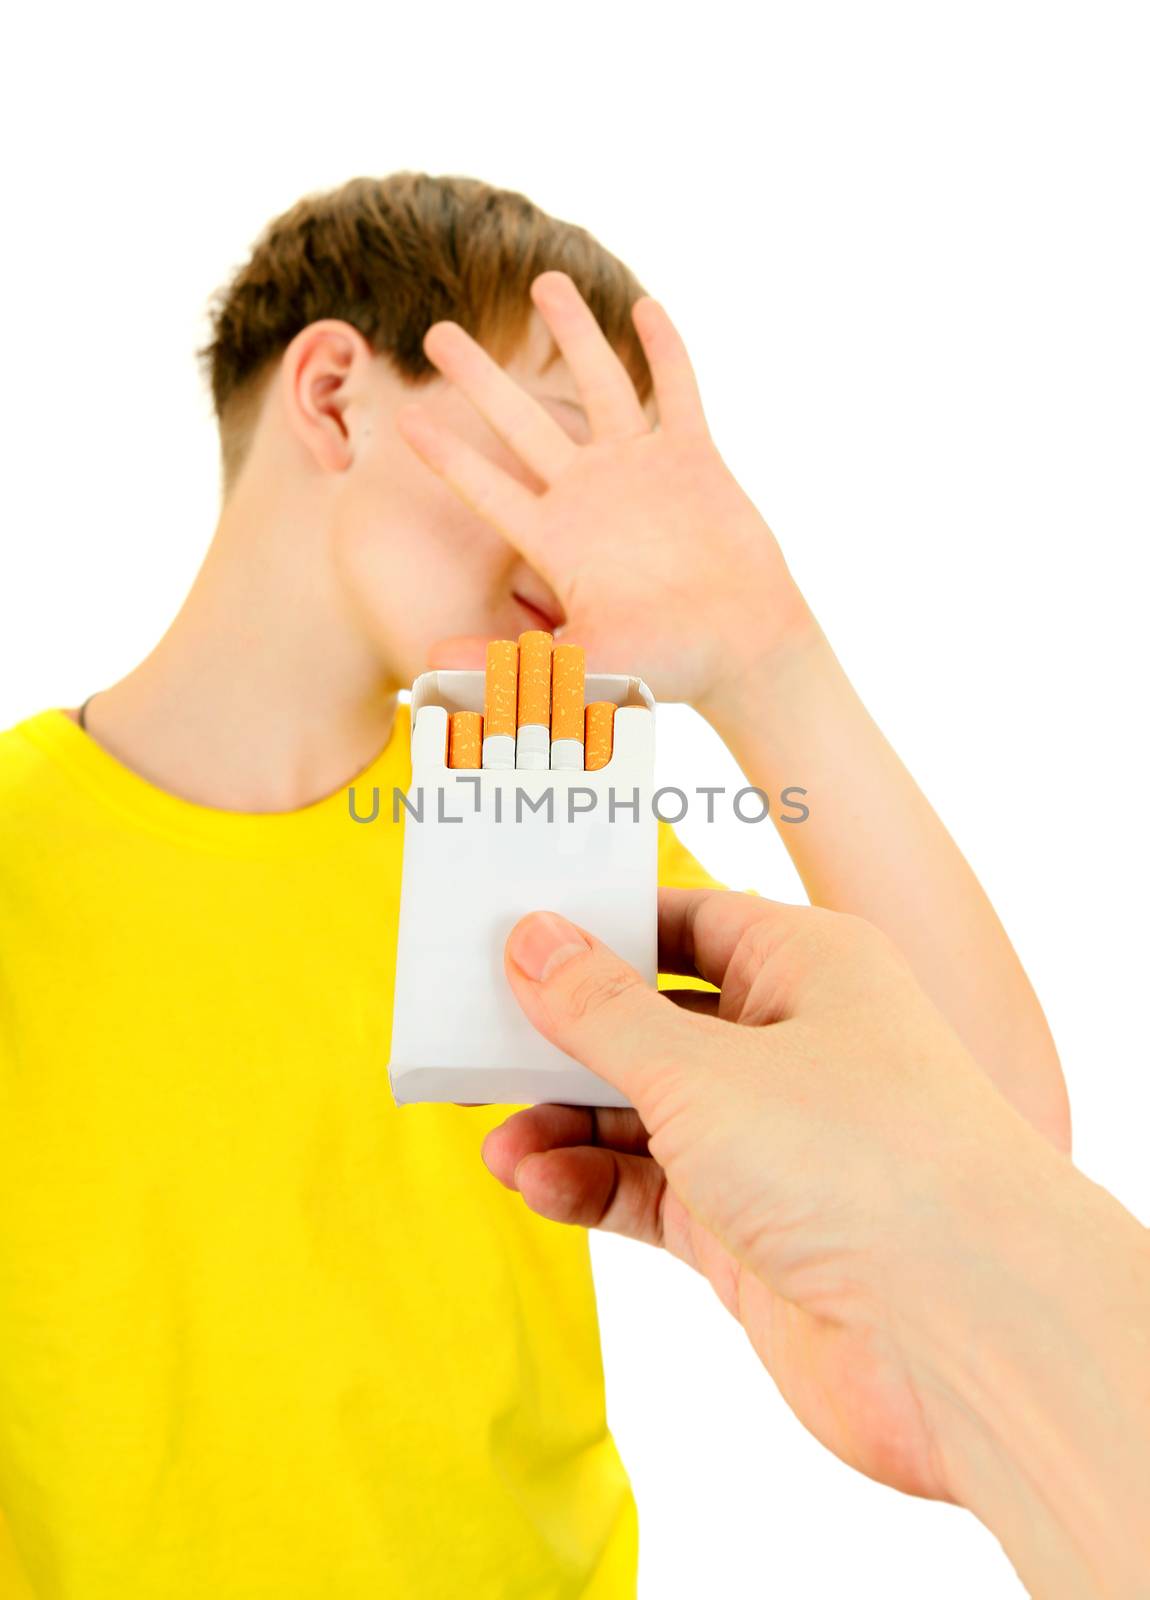 Kid refuse Cigarettes Isolated on the White Background